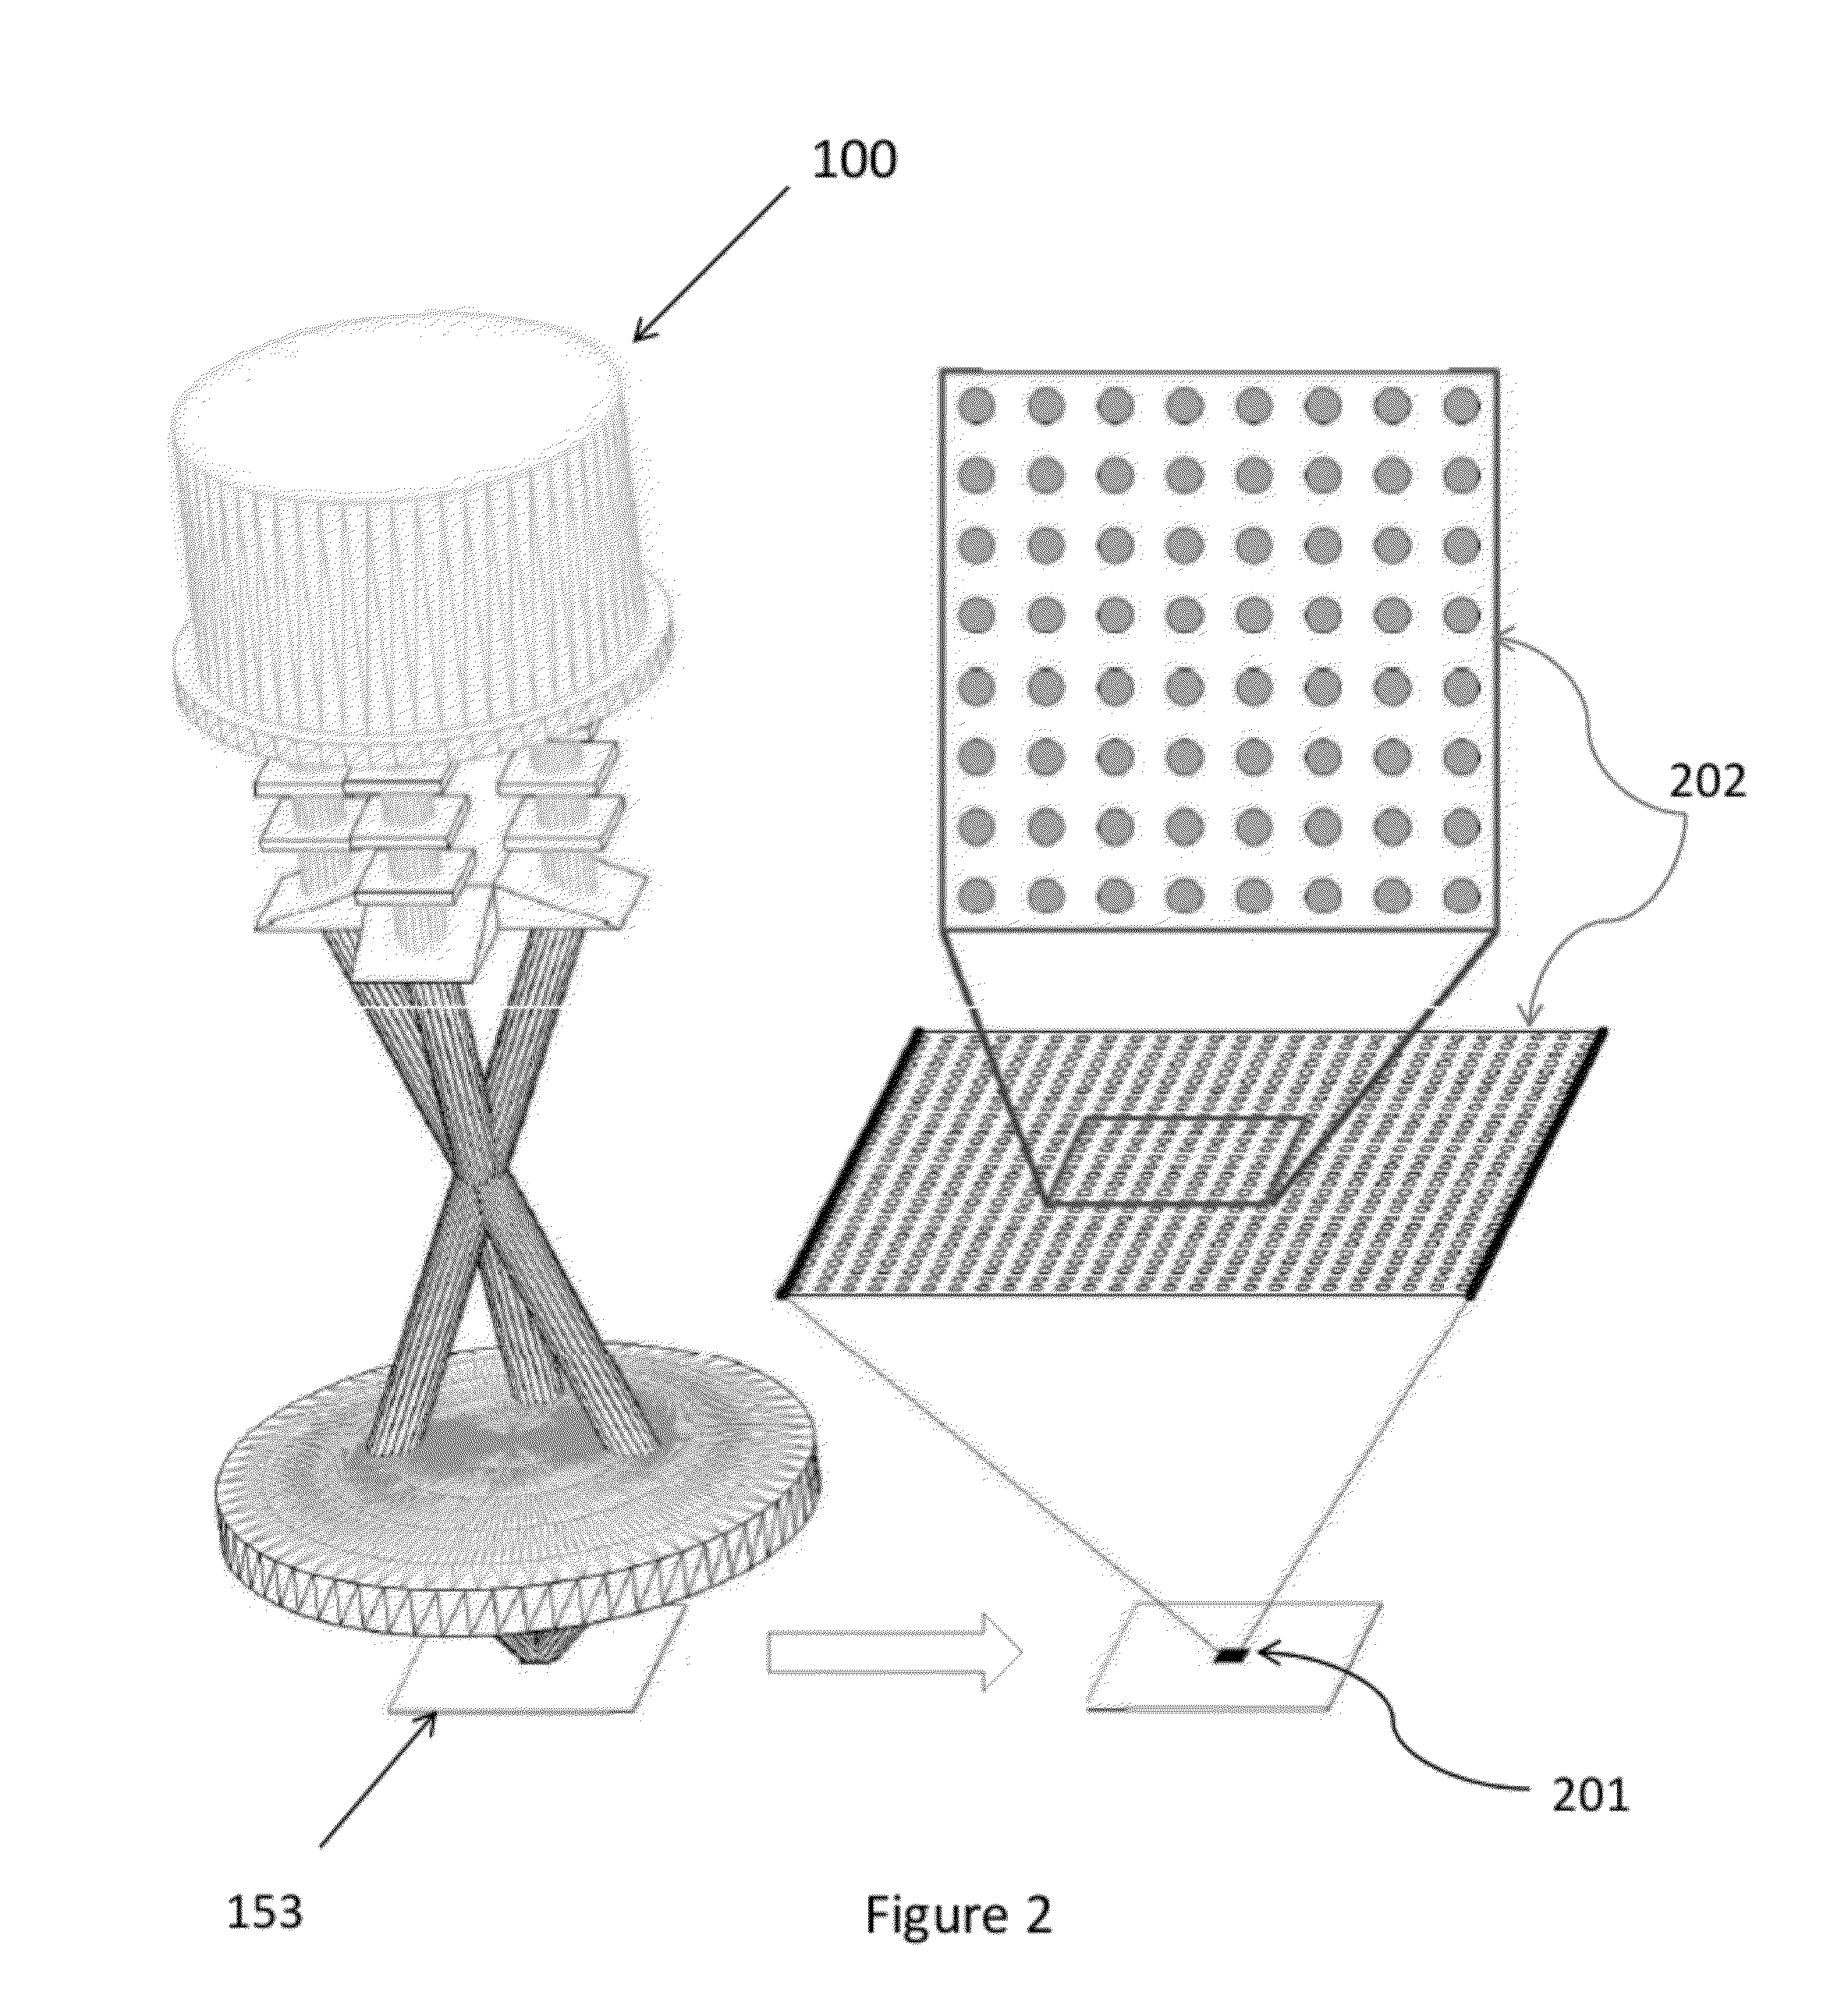 Interference projection exposure system and method of using same